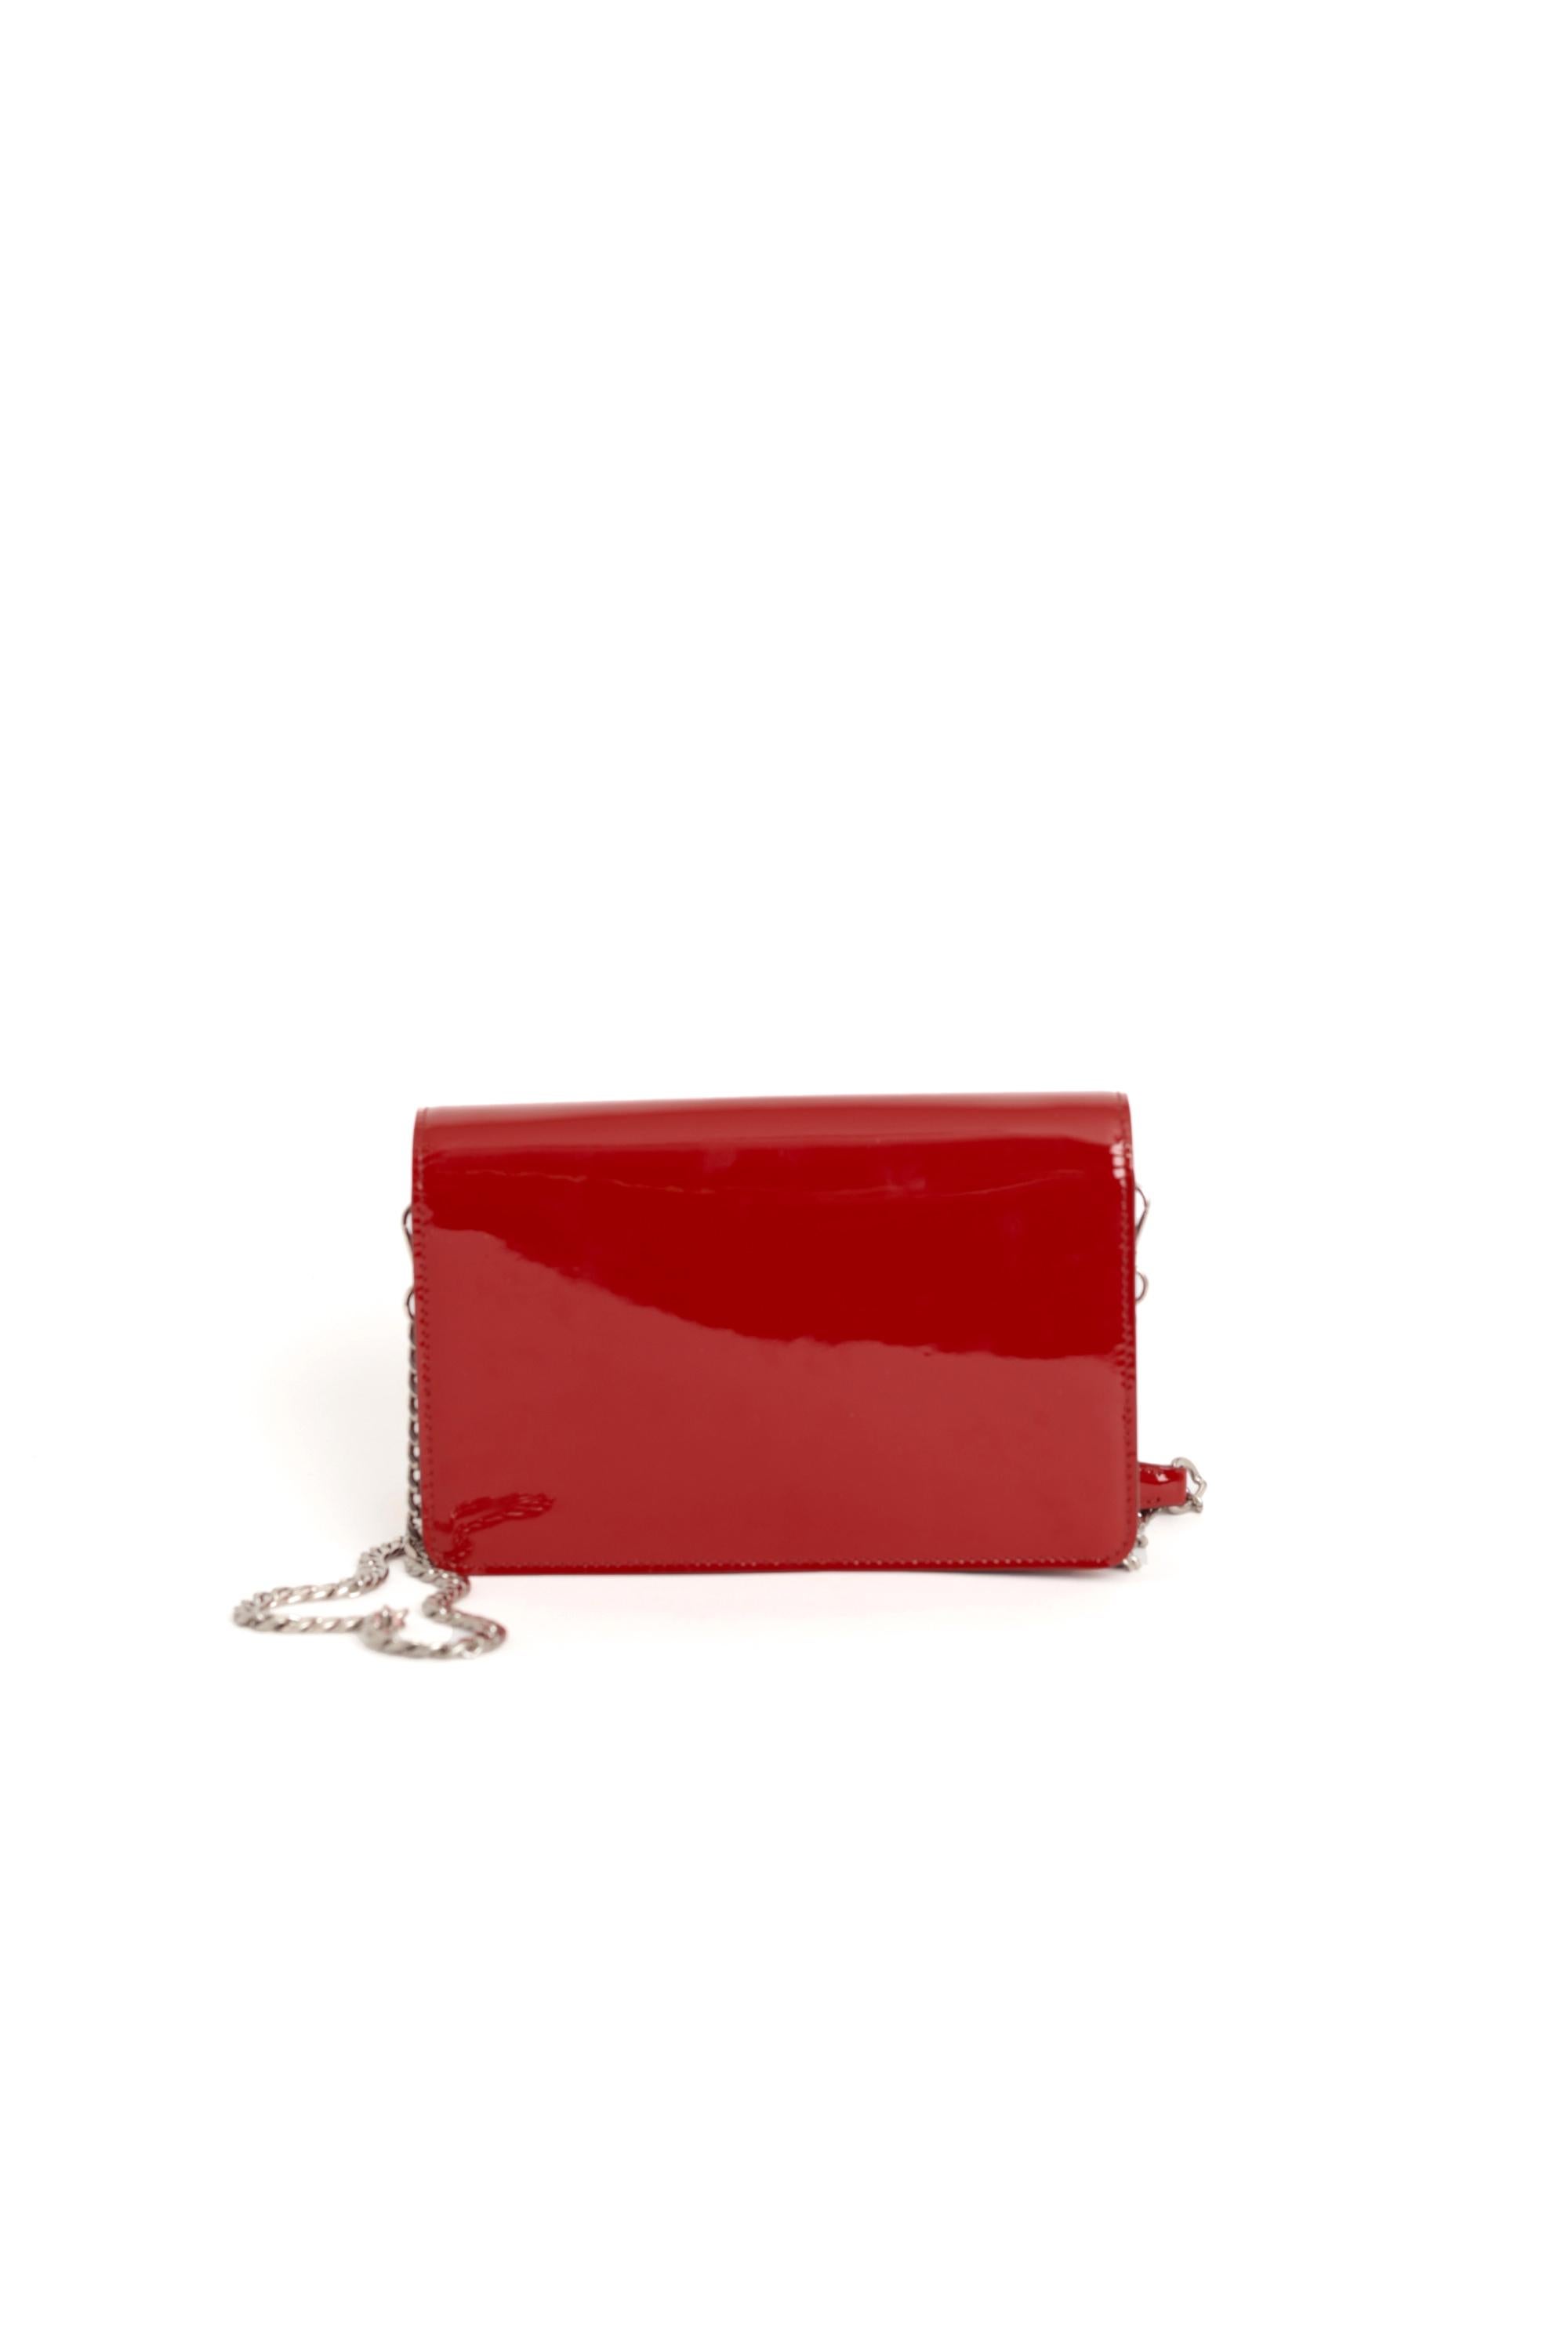 Miu Miu 2000’s red patent leather mini crystal embellished crossbody bag. Features silver removable chain strap, two inside compartments with a zip pocket and card compartments pocket. Pre-loved, in excellent vintage condition.
Brand: Miu Miu
Color: